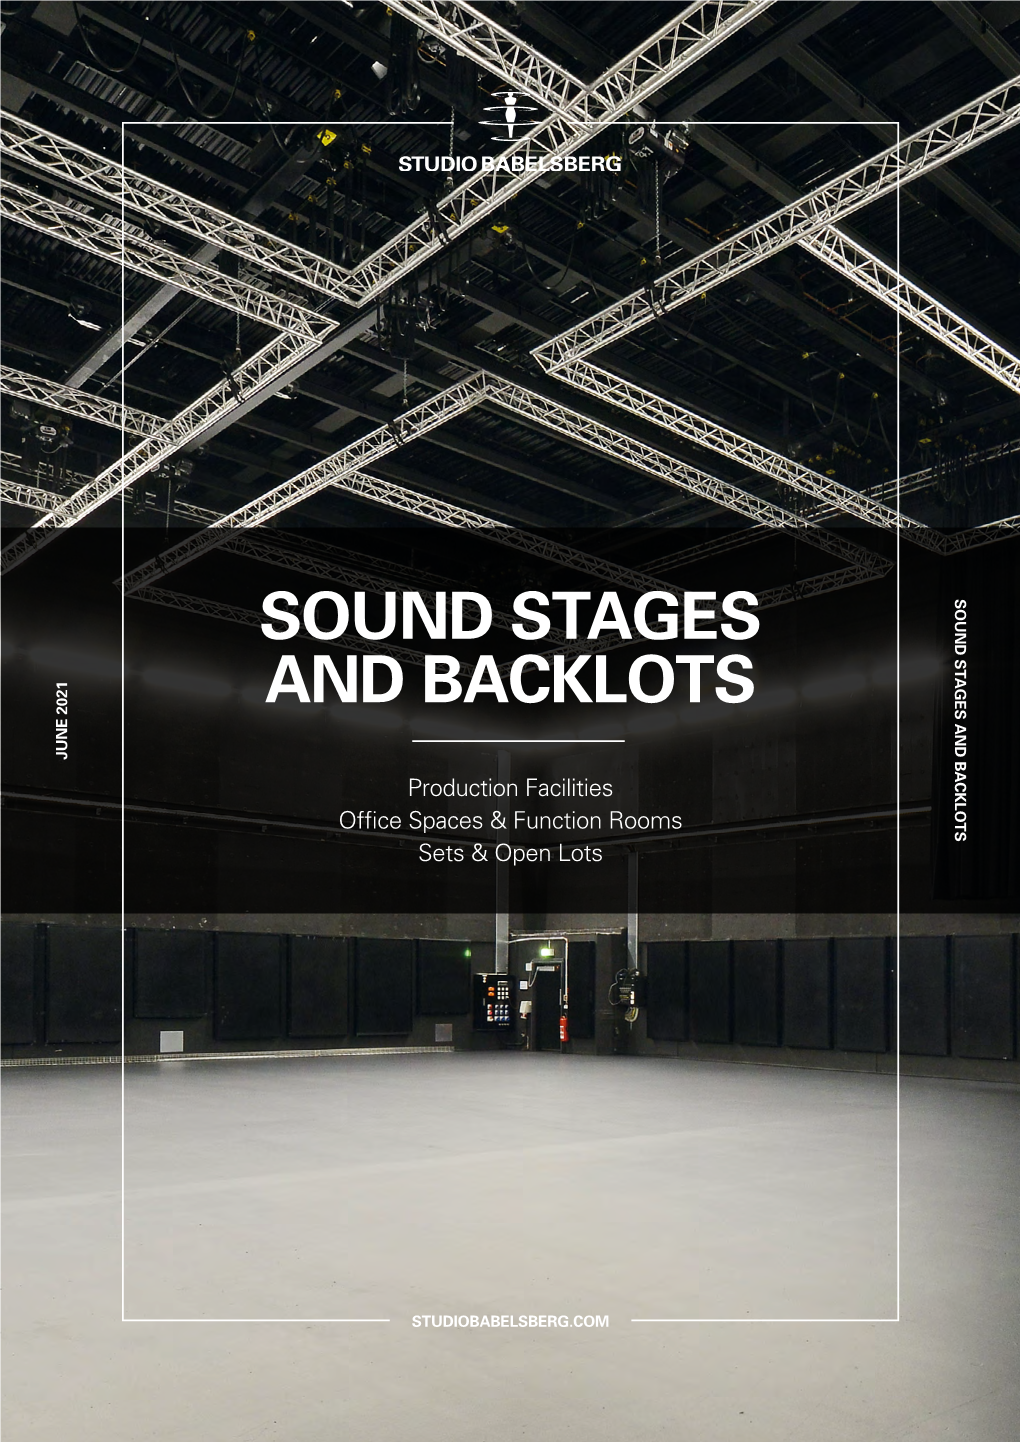 SOUND STAGES and BACKLOTS and BACKLOTS JUNE 2021 Production Facilities Office Spaces & Function Rooms Sets & Open Lots